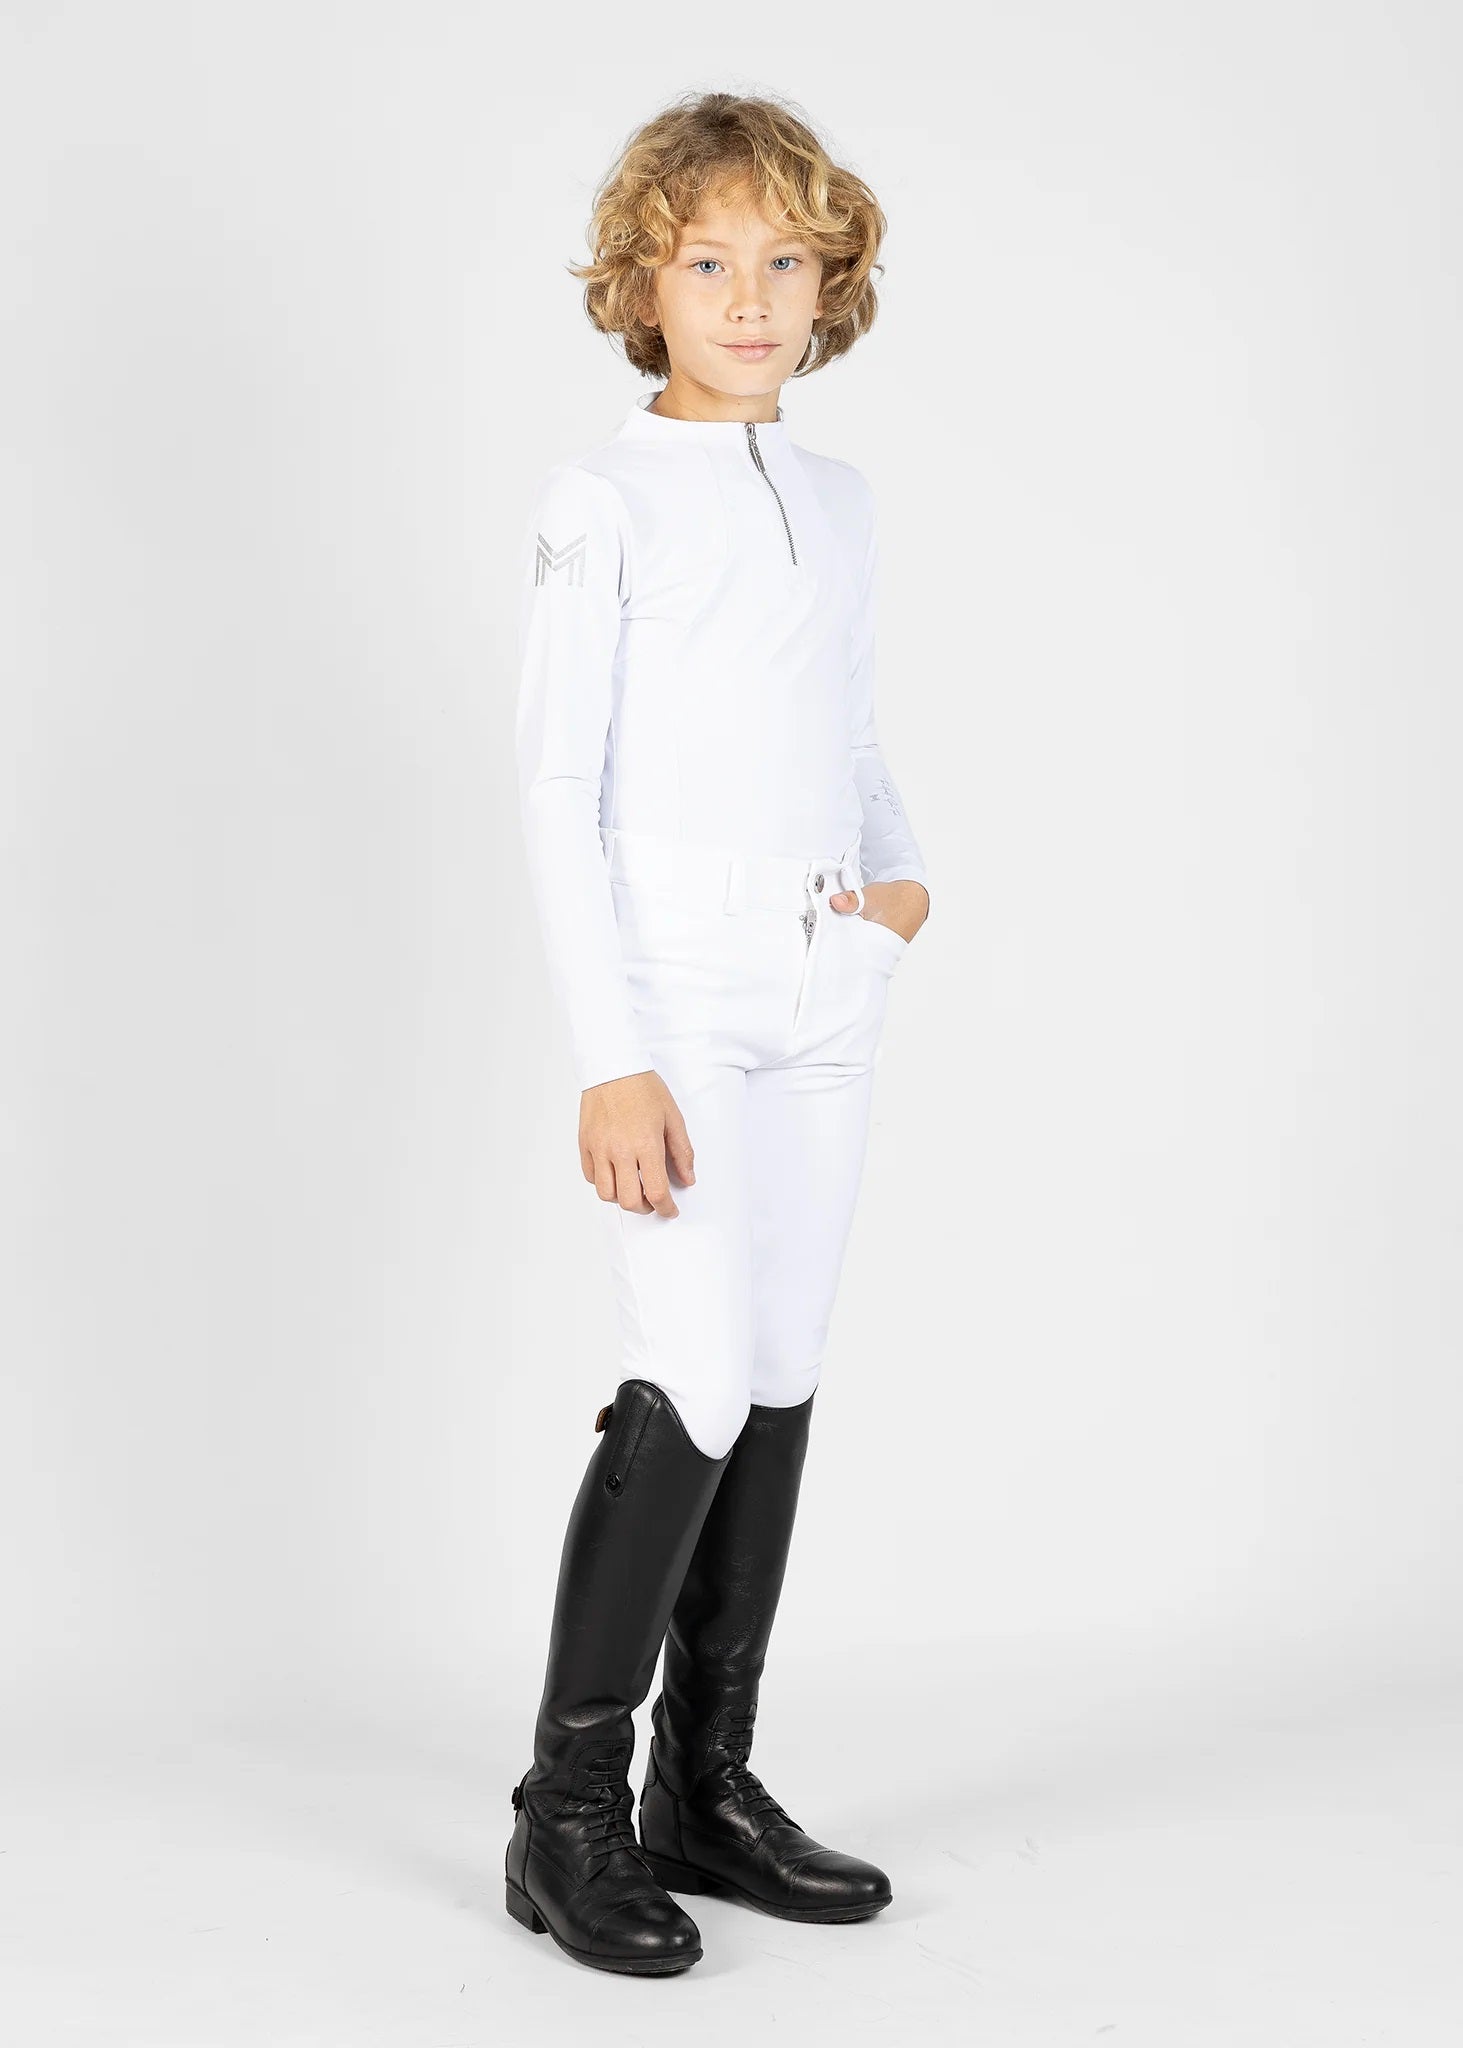 Young Riders - Performance Breeches - White